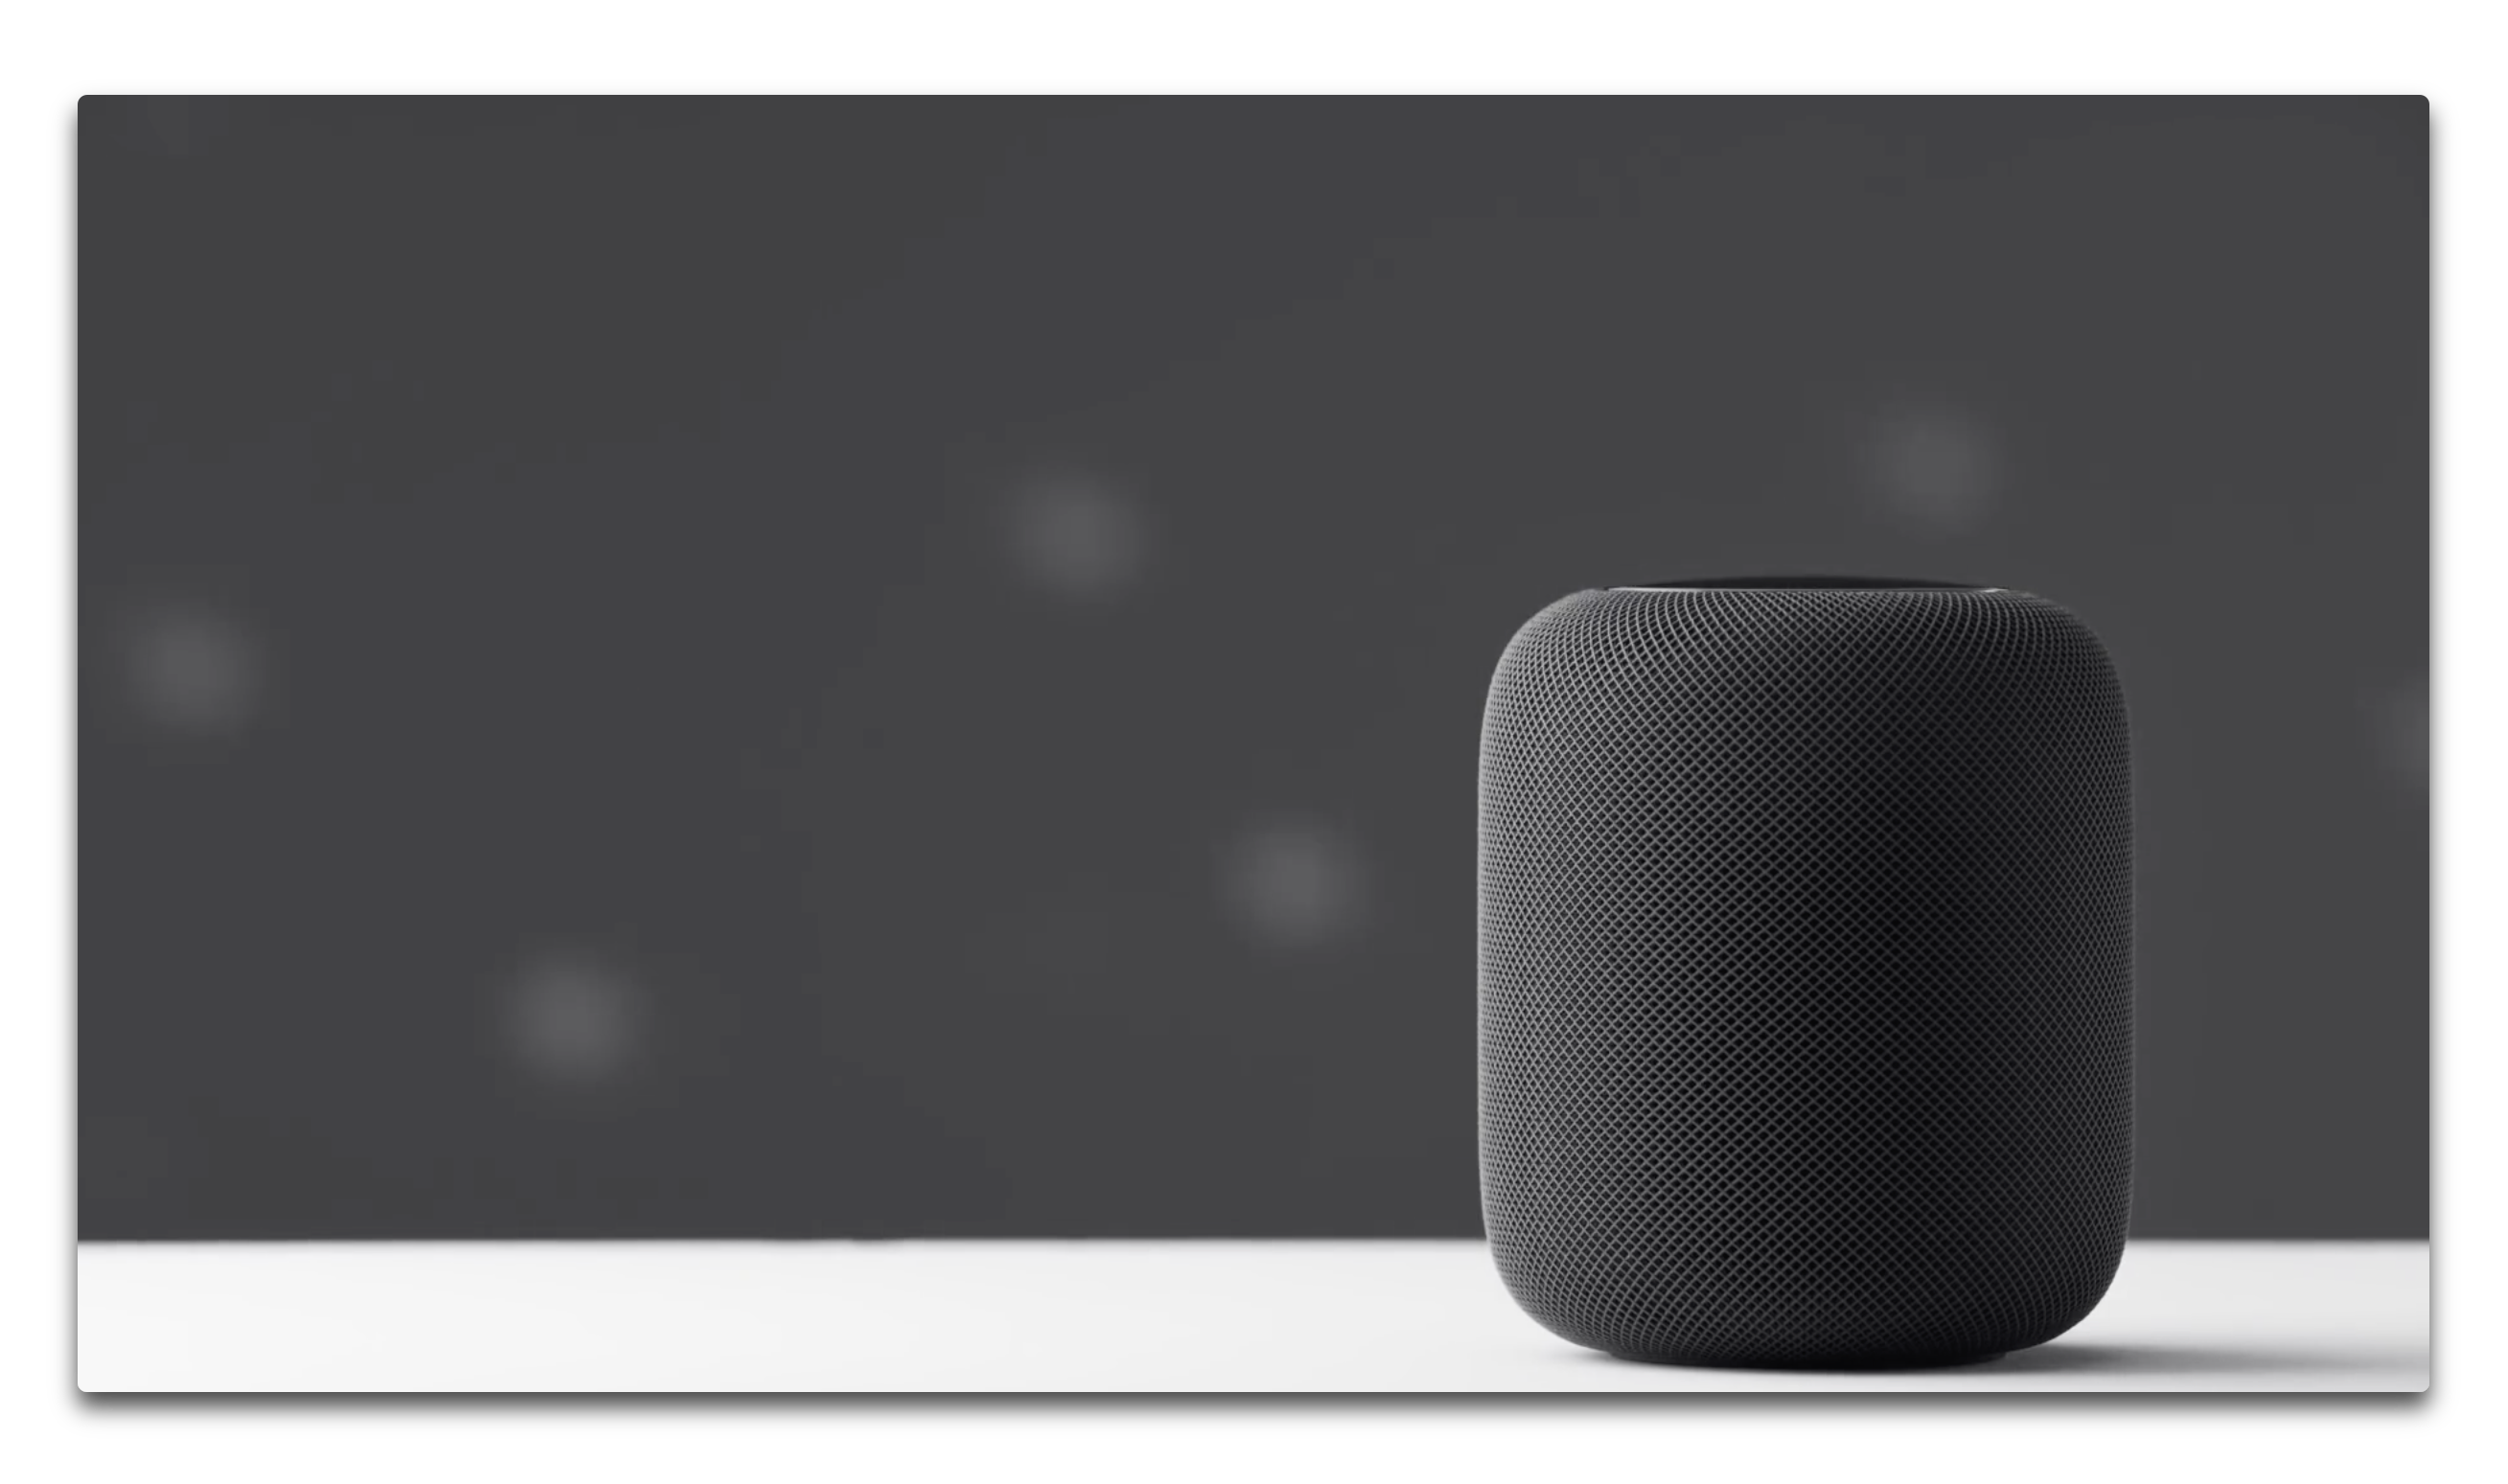 Apple Support、「How to get the most from HomePod」と題するサポートビデオを公開